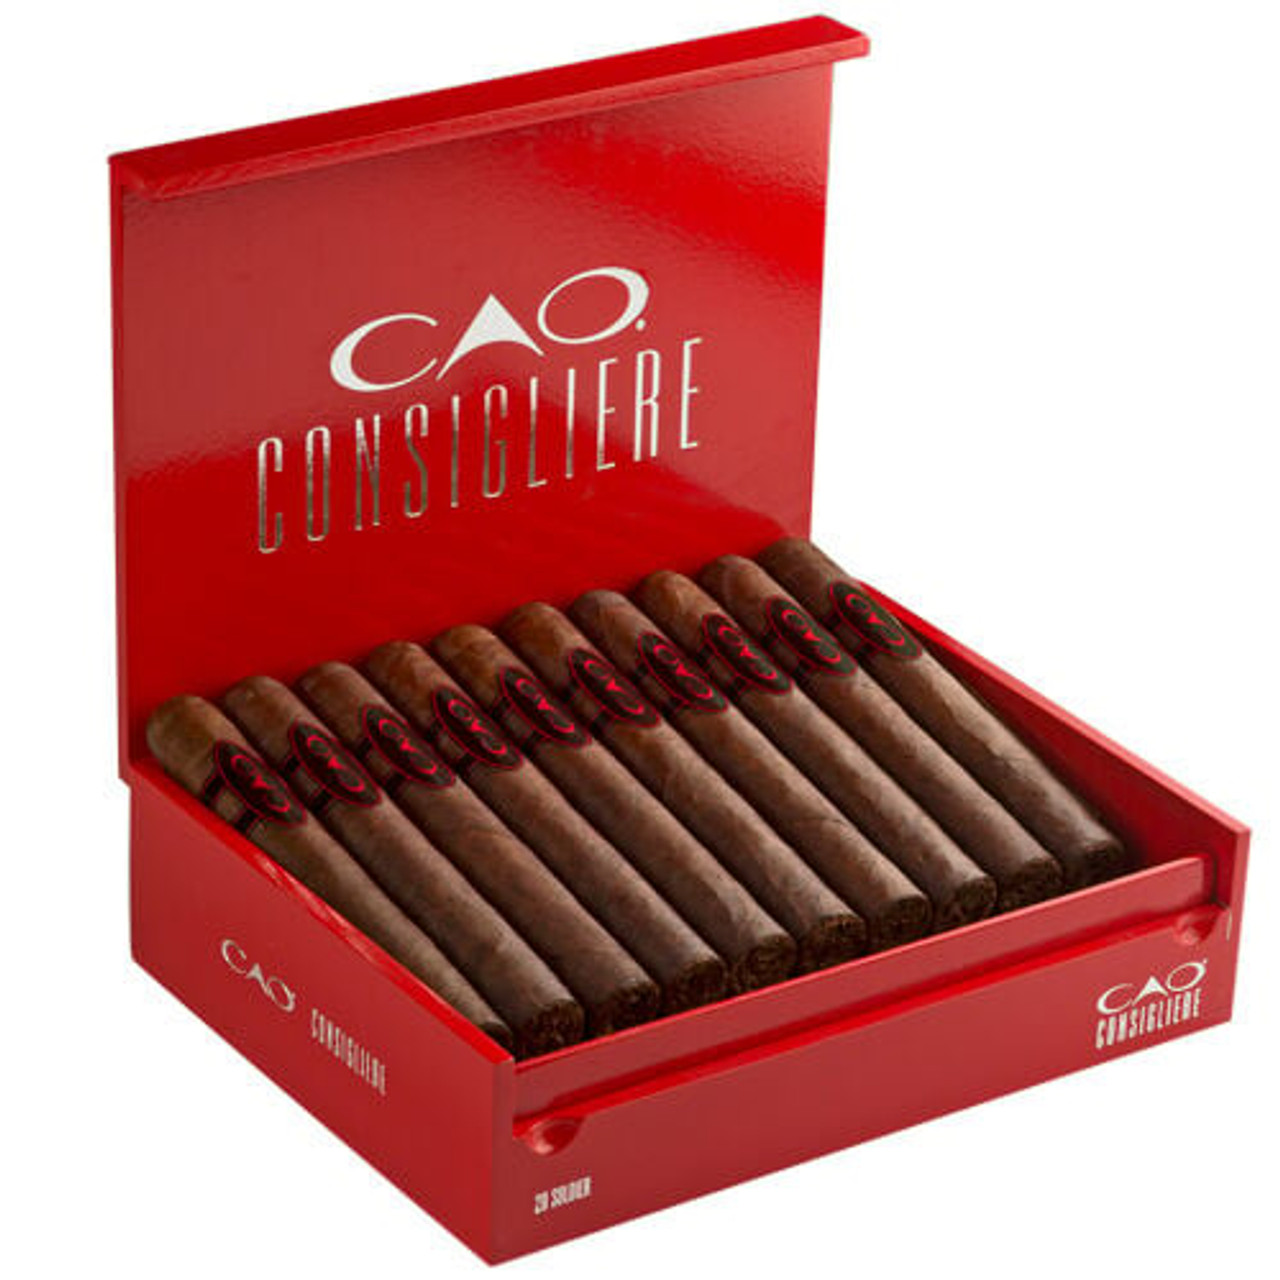 CAO Consigliere Soldier Cigars - 6 x 54 (Box of 20) Open